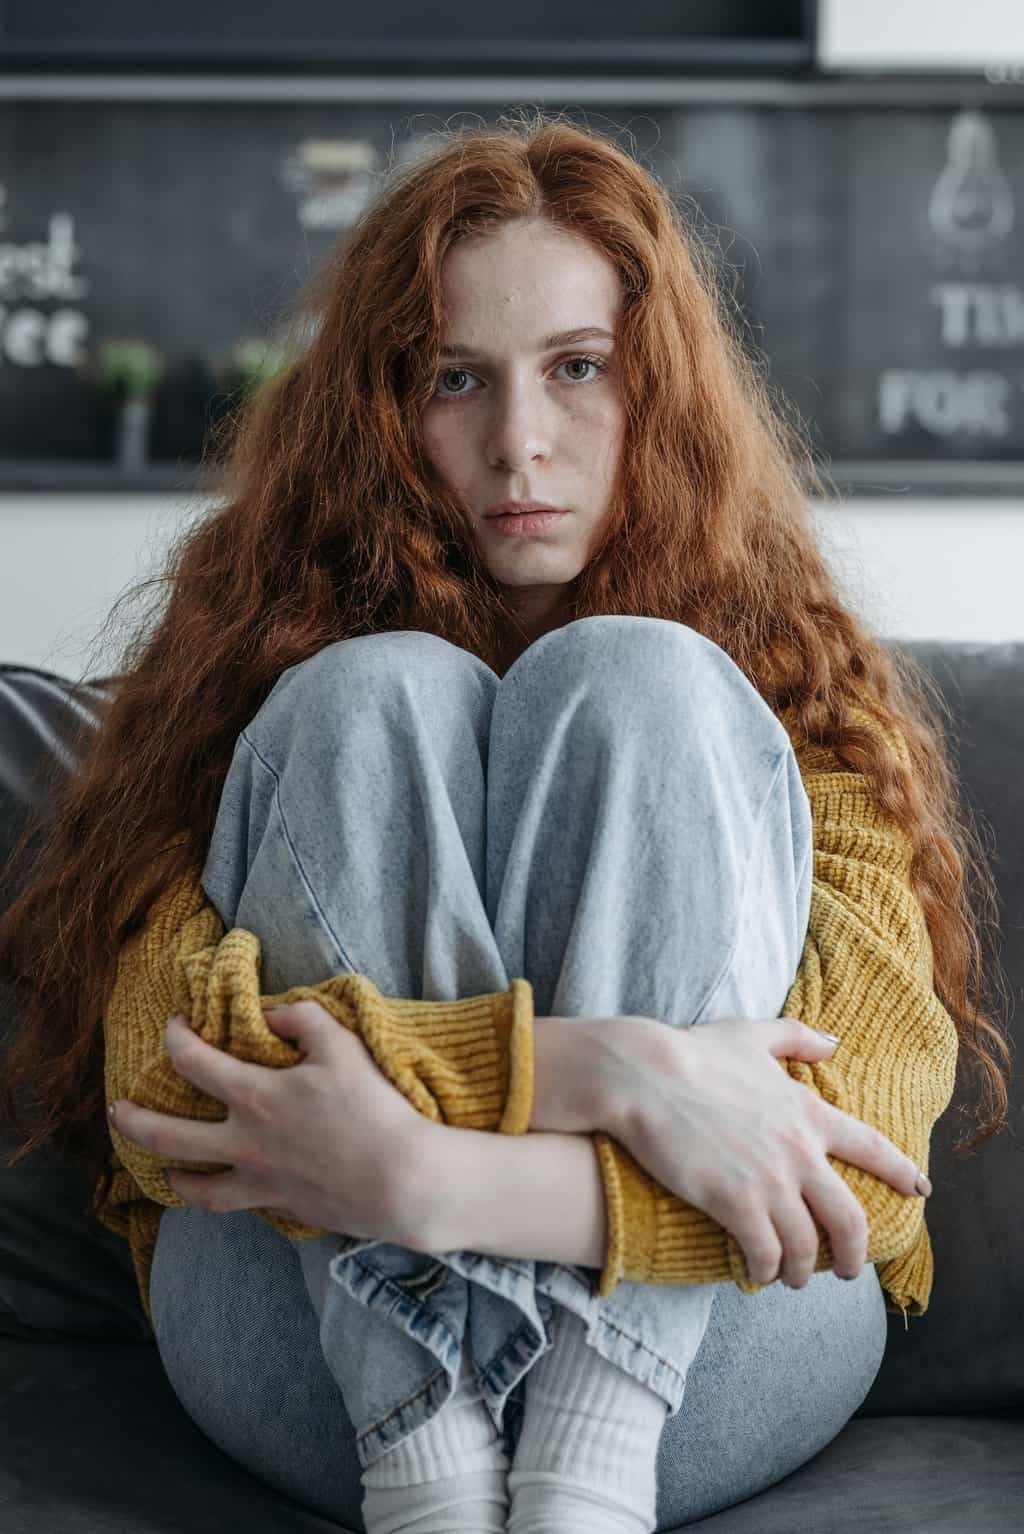 Unhappy woman questions if CBT or Cognitive Behavioral Therapy will reduce her depression.